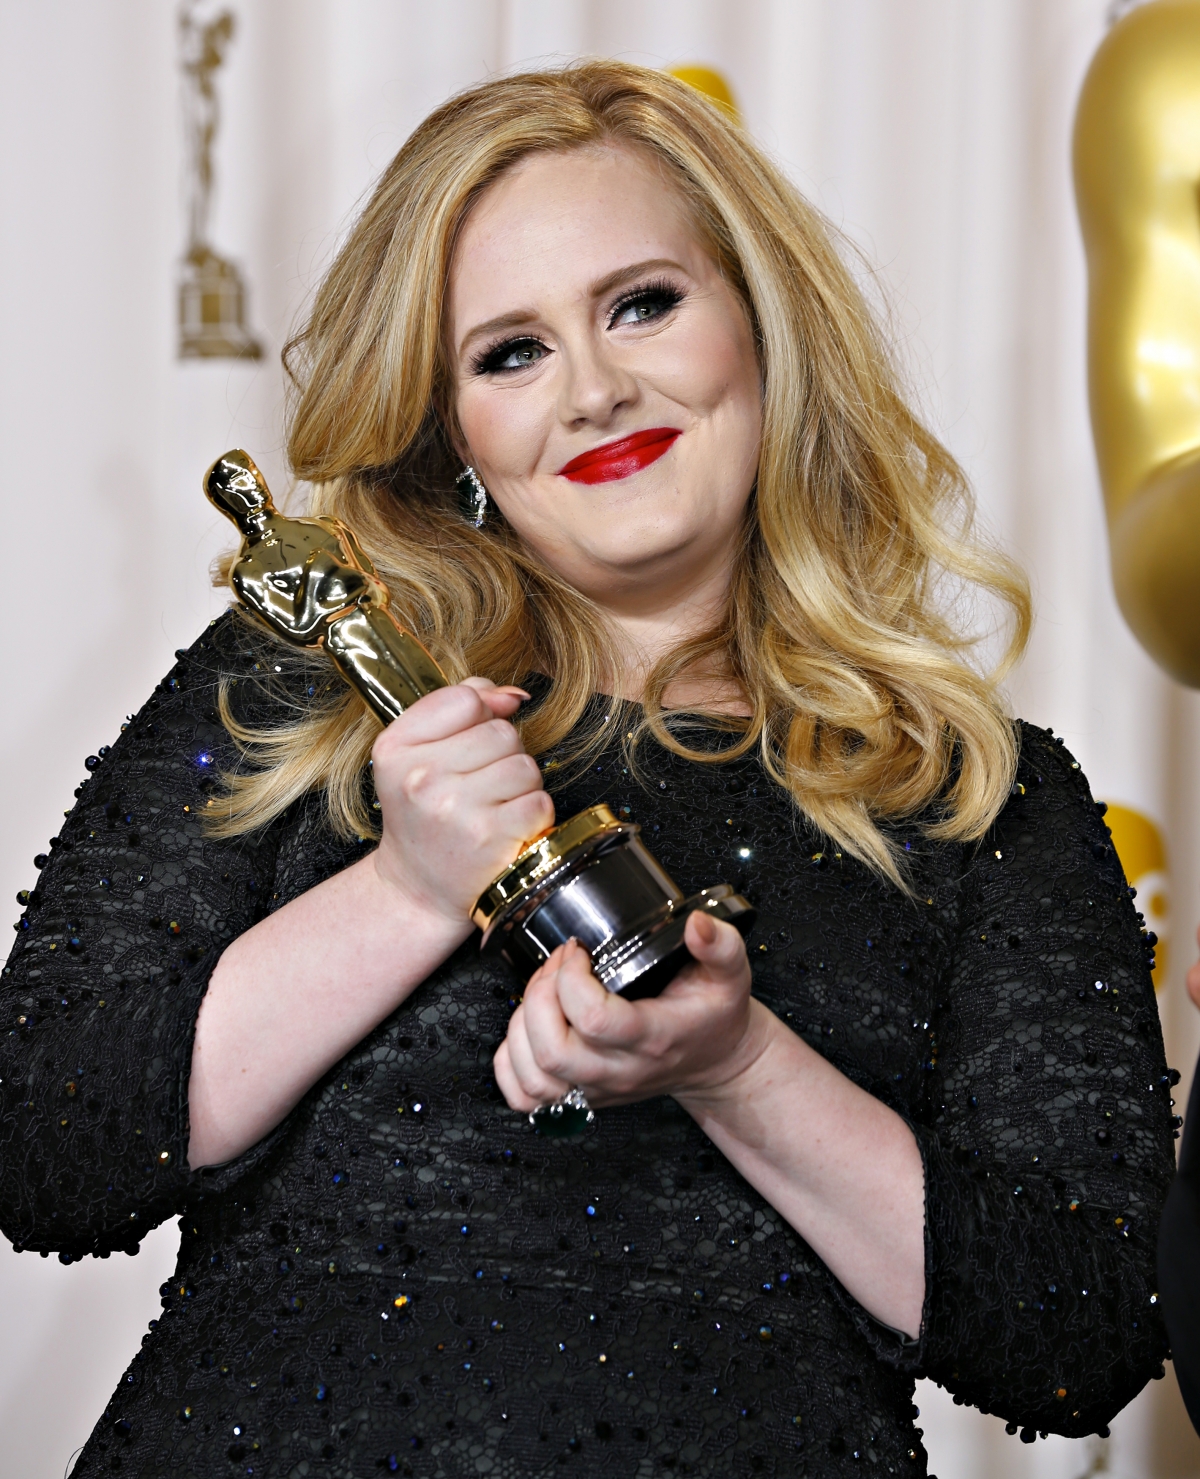 Adele new album set for November release? Singer could compete with 